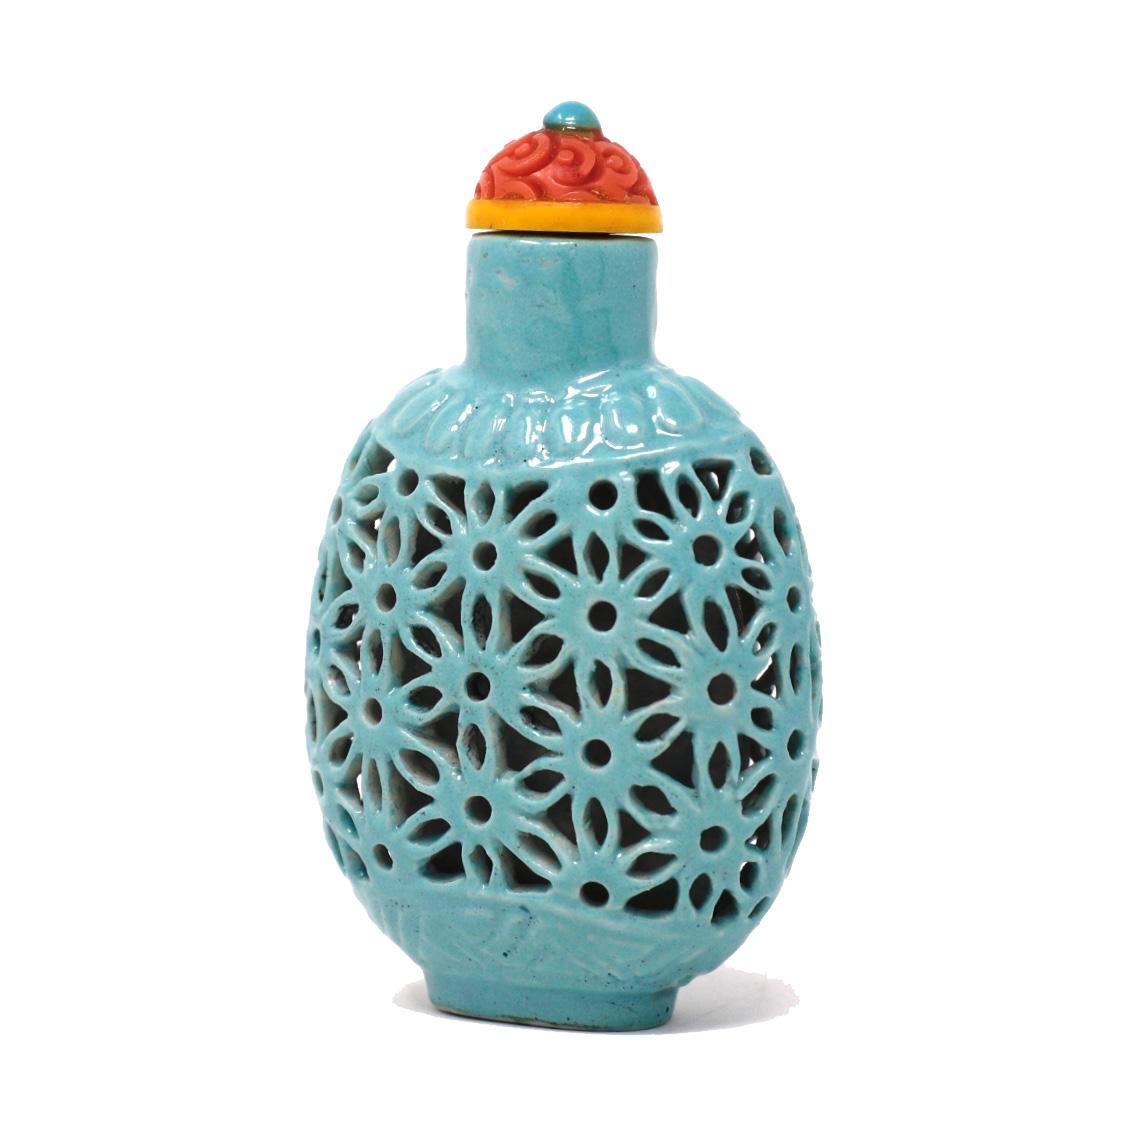 Early 20th Century Turquoise Blue Chinese Reticulated Soft Paste Porcelain Snuff Bottle, circa 1900